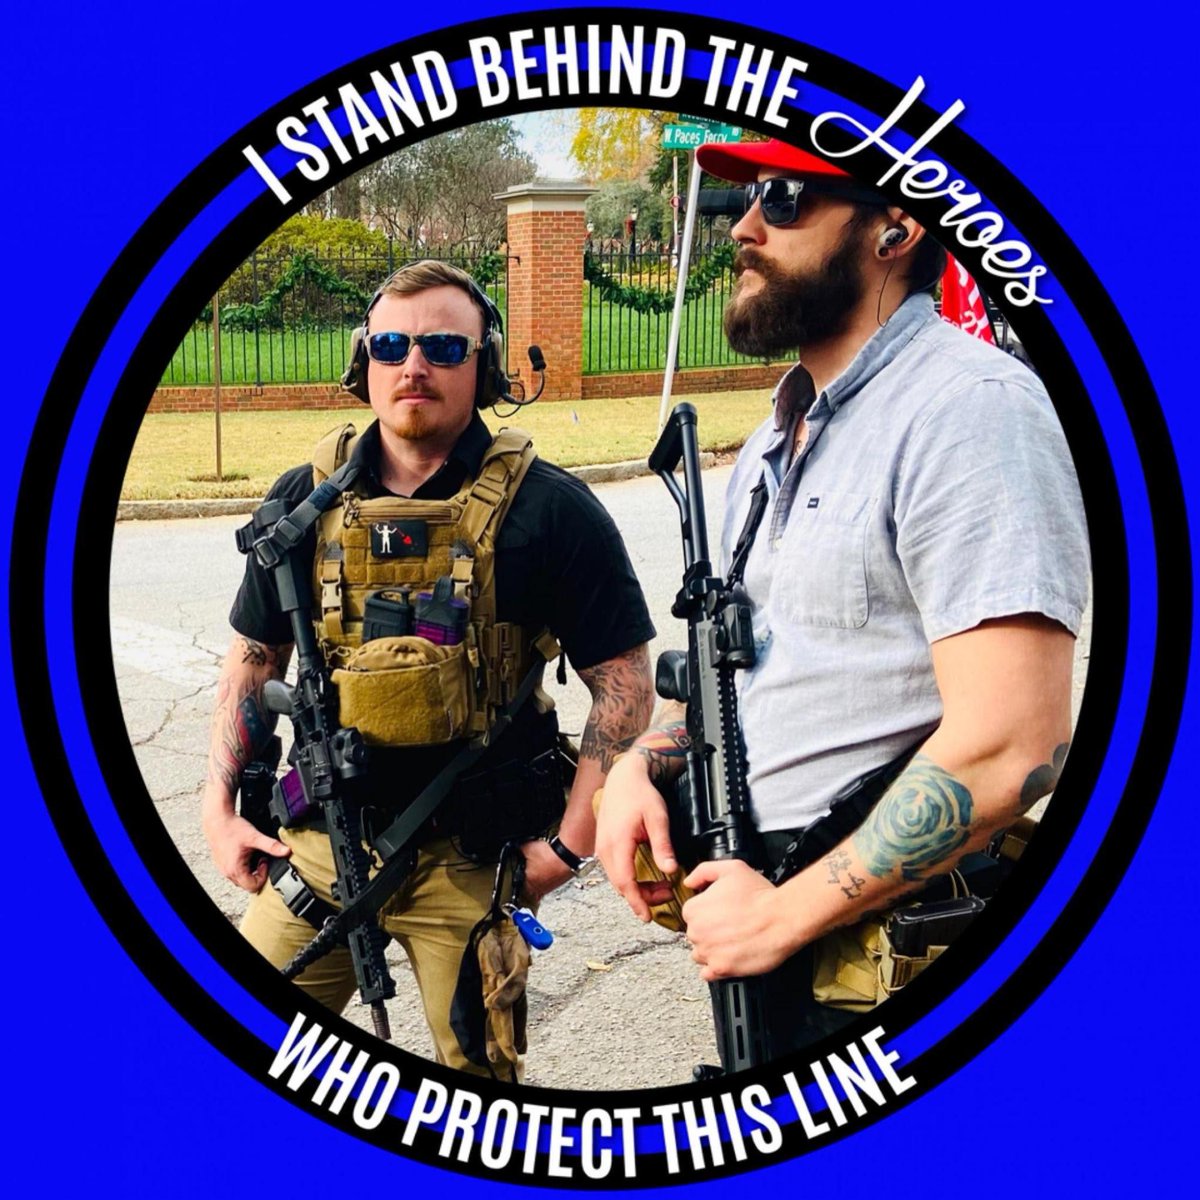 5/ Though Cooper is masked in the attack video, he was happy to appear unmasked throughout the rally preceding the attack, and can be identified by his gun, pants, shoes, hat, and sunglasses.In a profile picture on his since-deleted Facebook page, he poses with his gun.